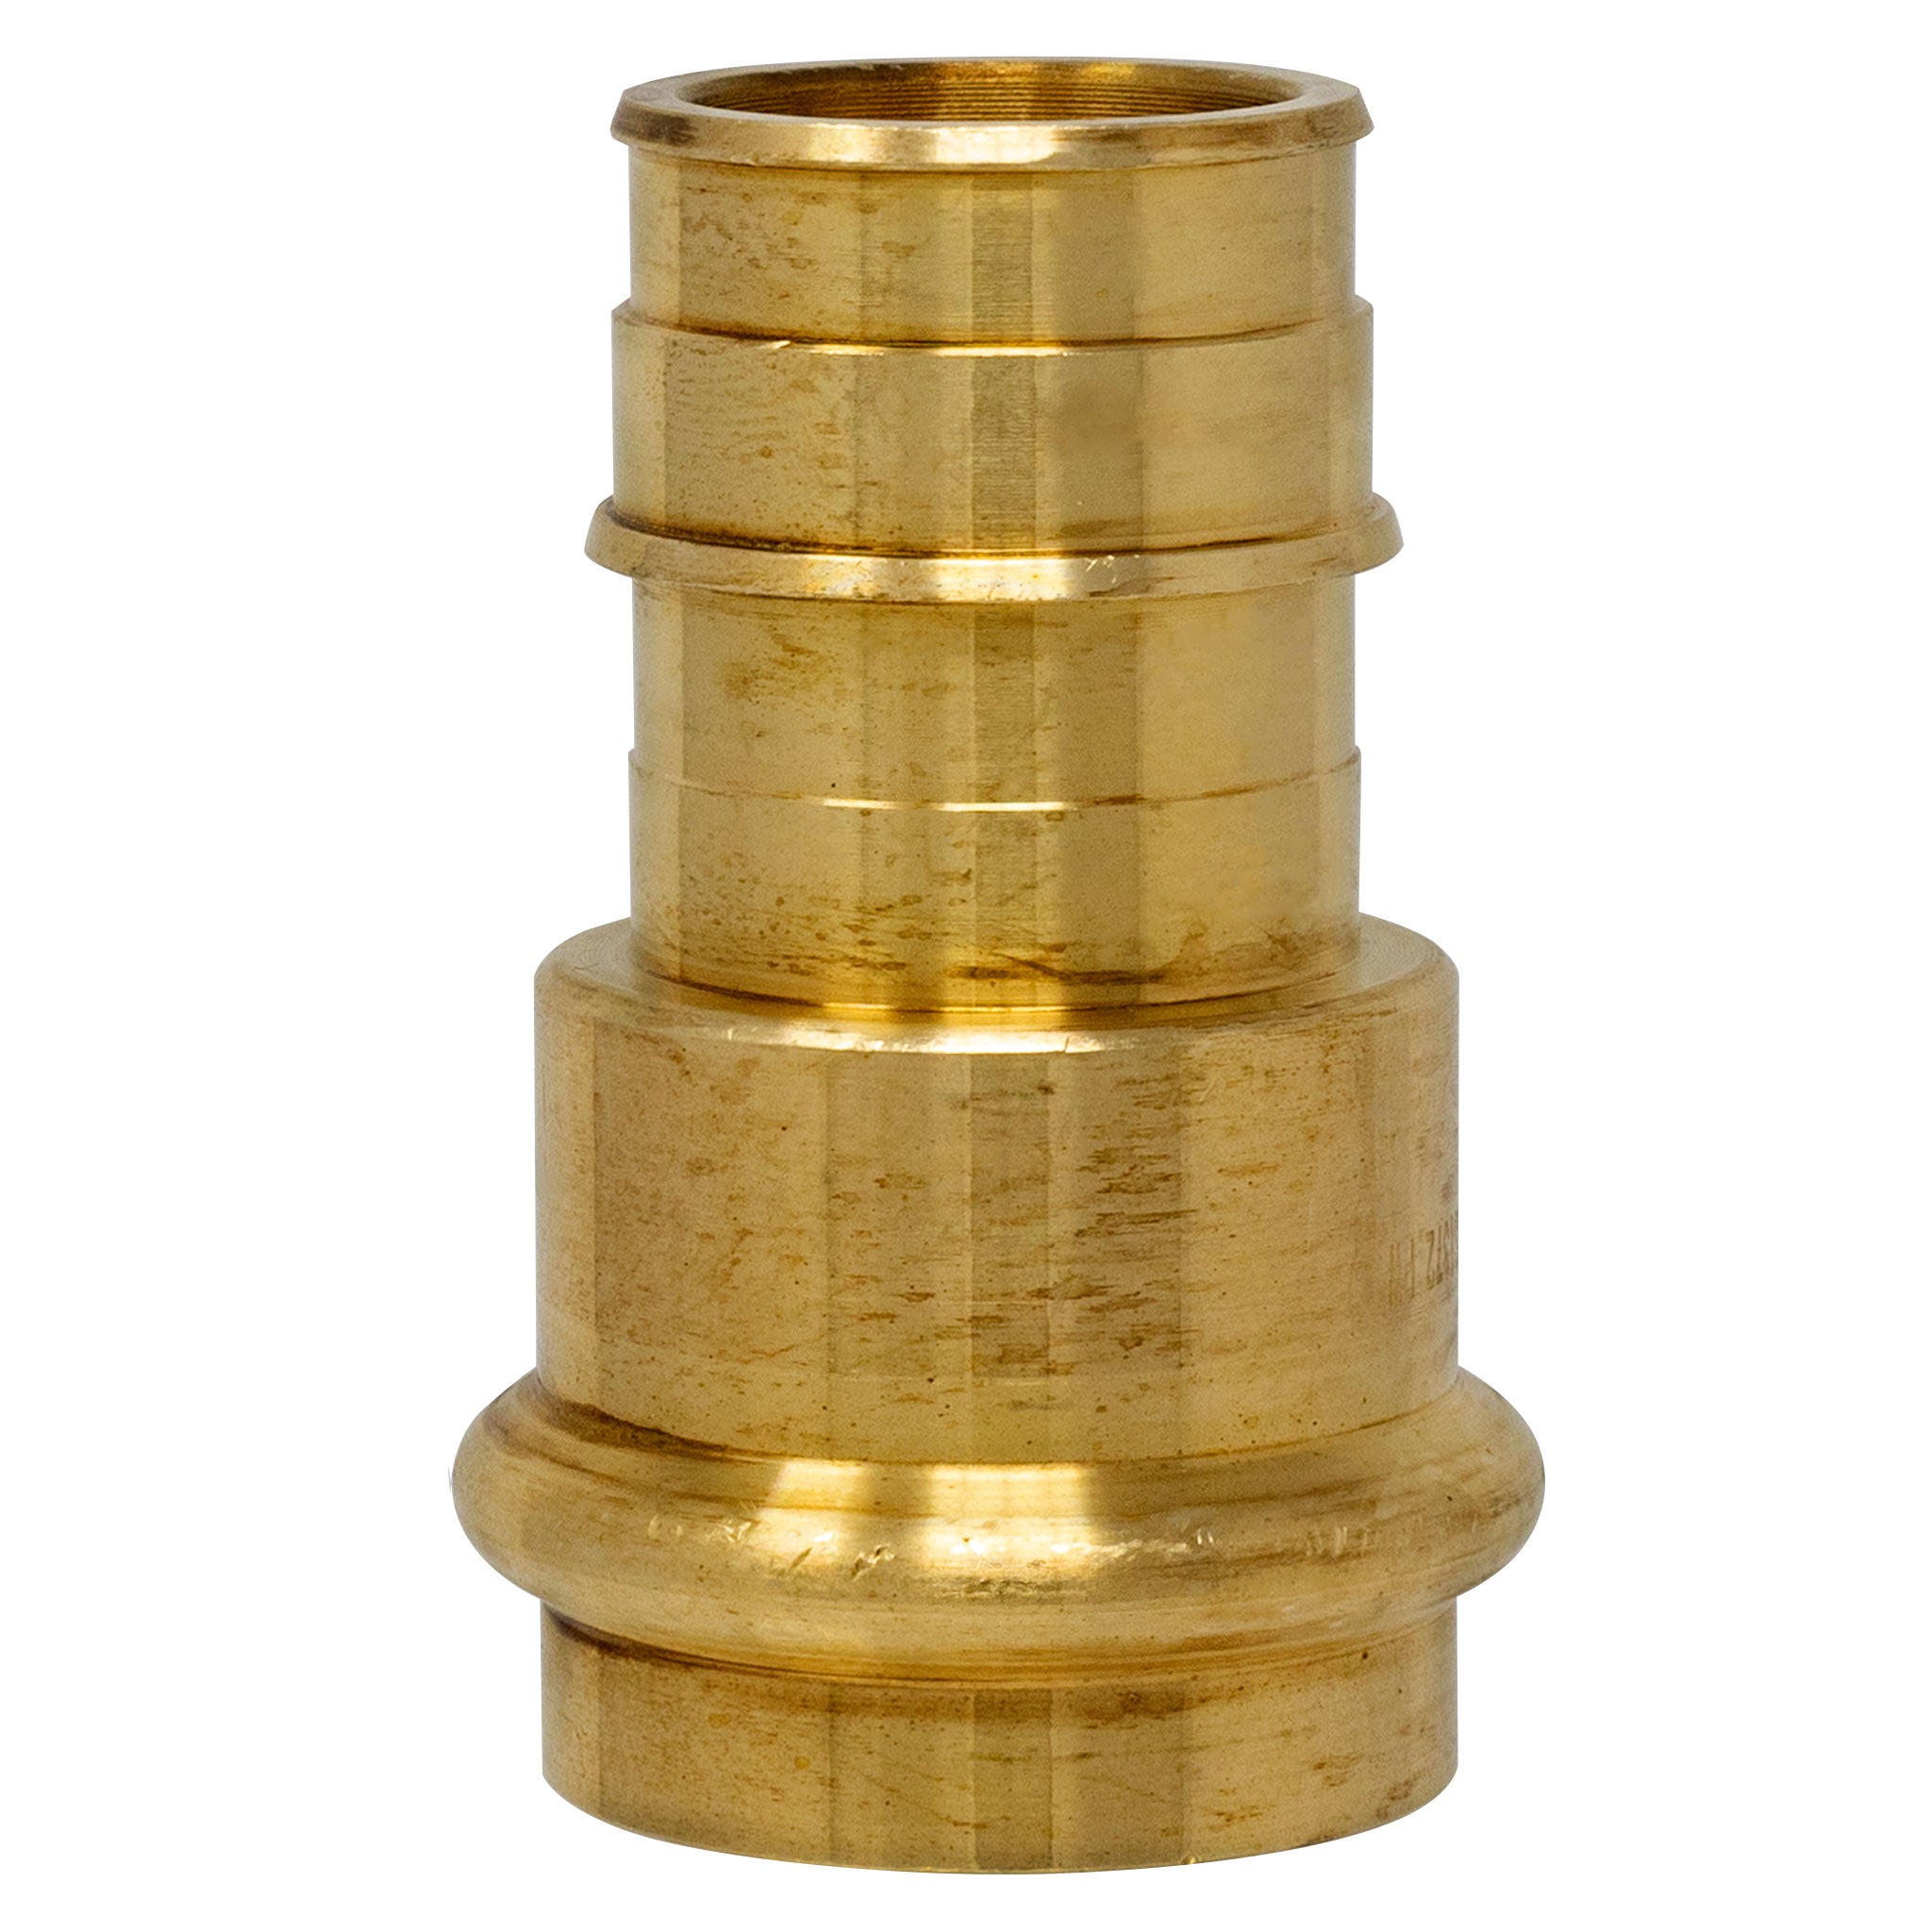 1" P x 1" PEX A (Expansion) Lead Free Brass Press Fitting Adapter F1960, ProPress Compatible